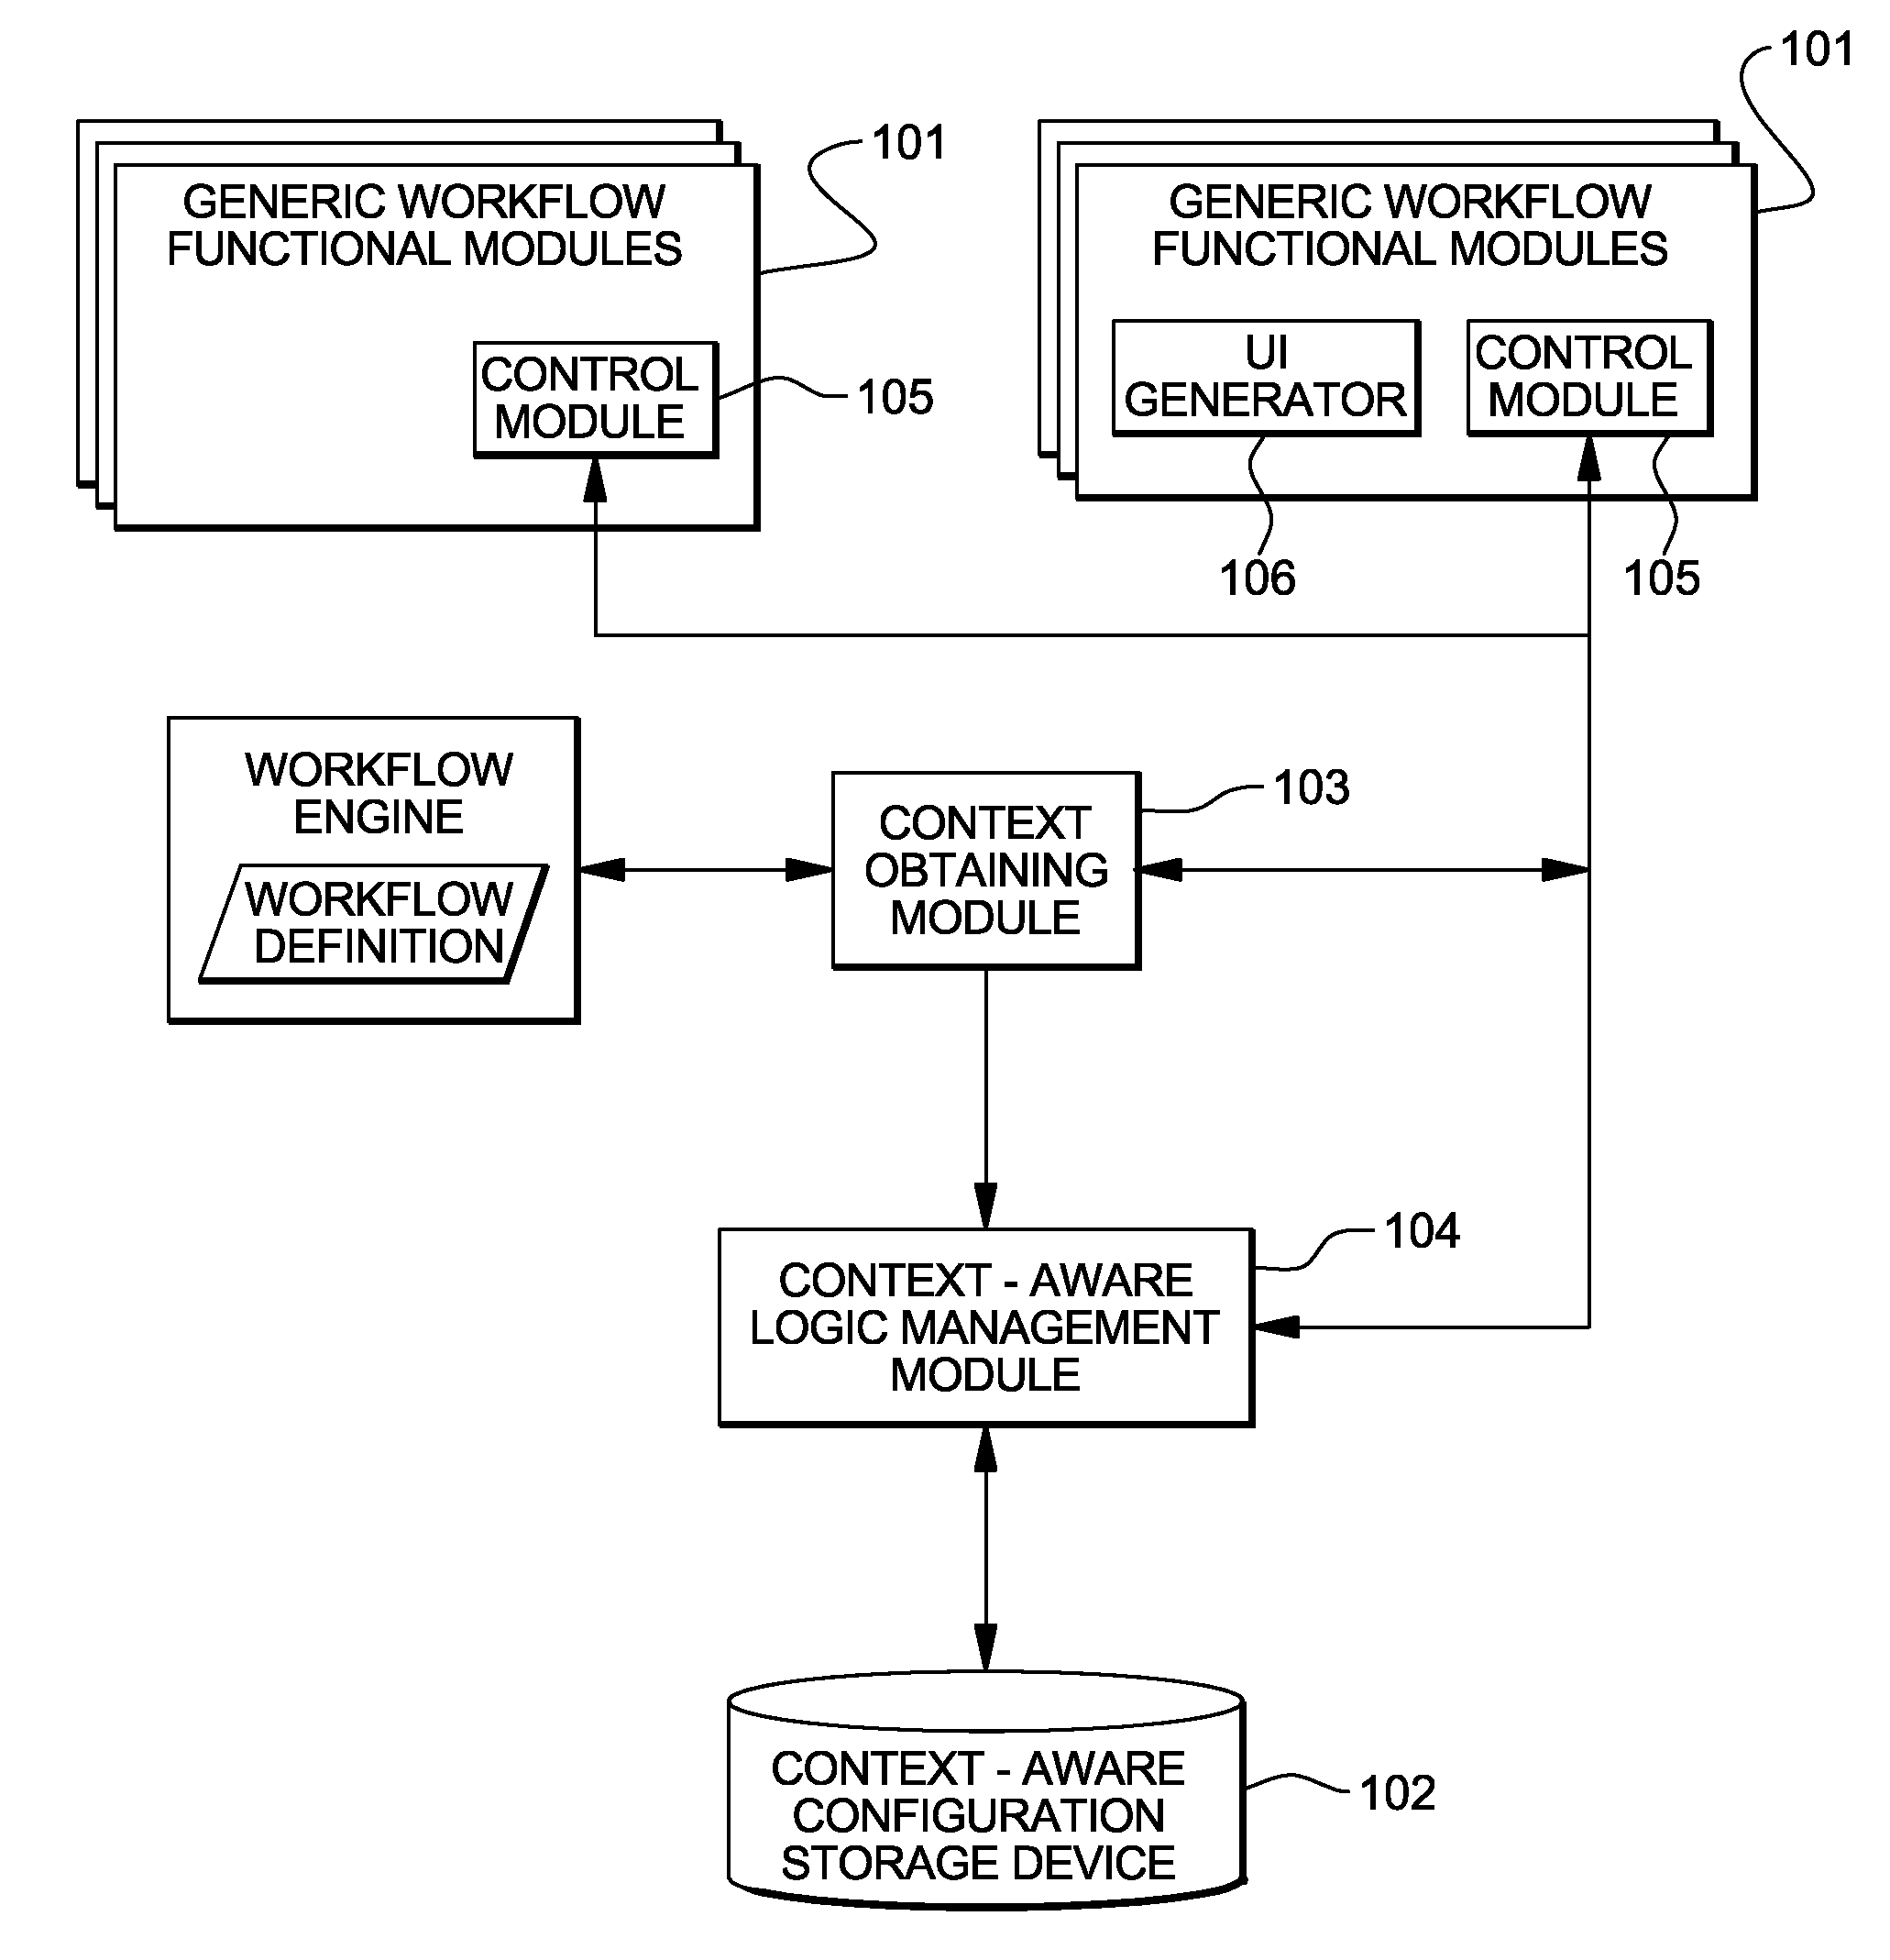 Method and Apparatus for Generating Context-Aware Generic Workflow Applications